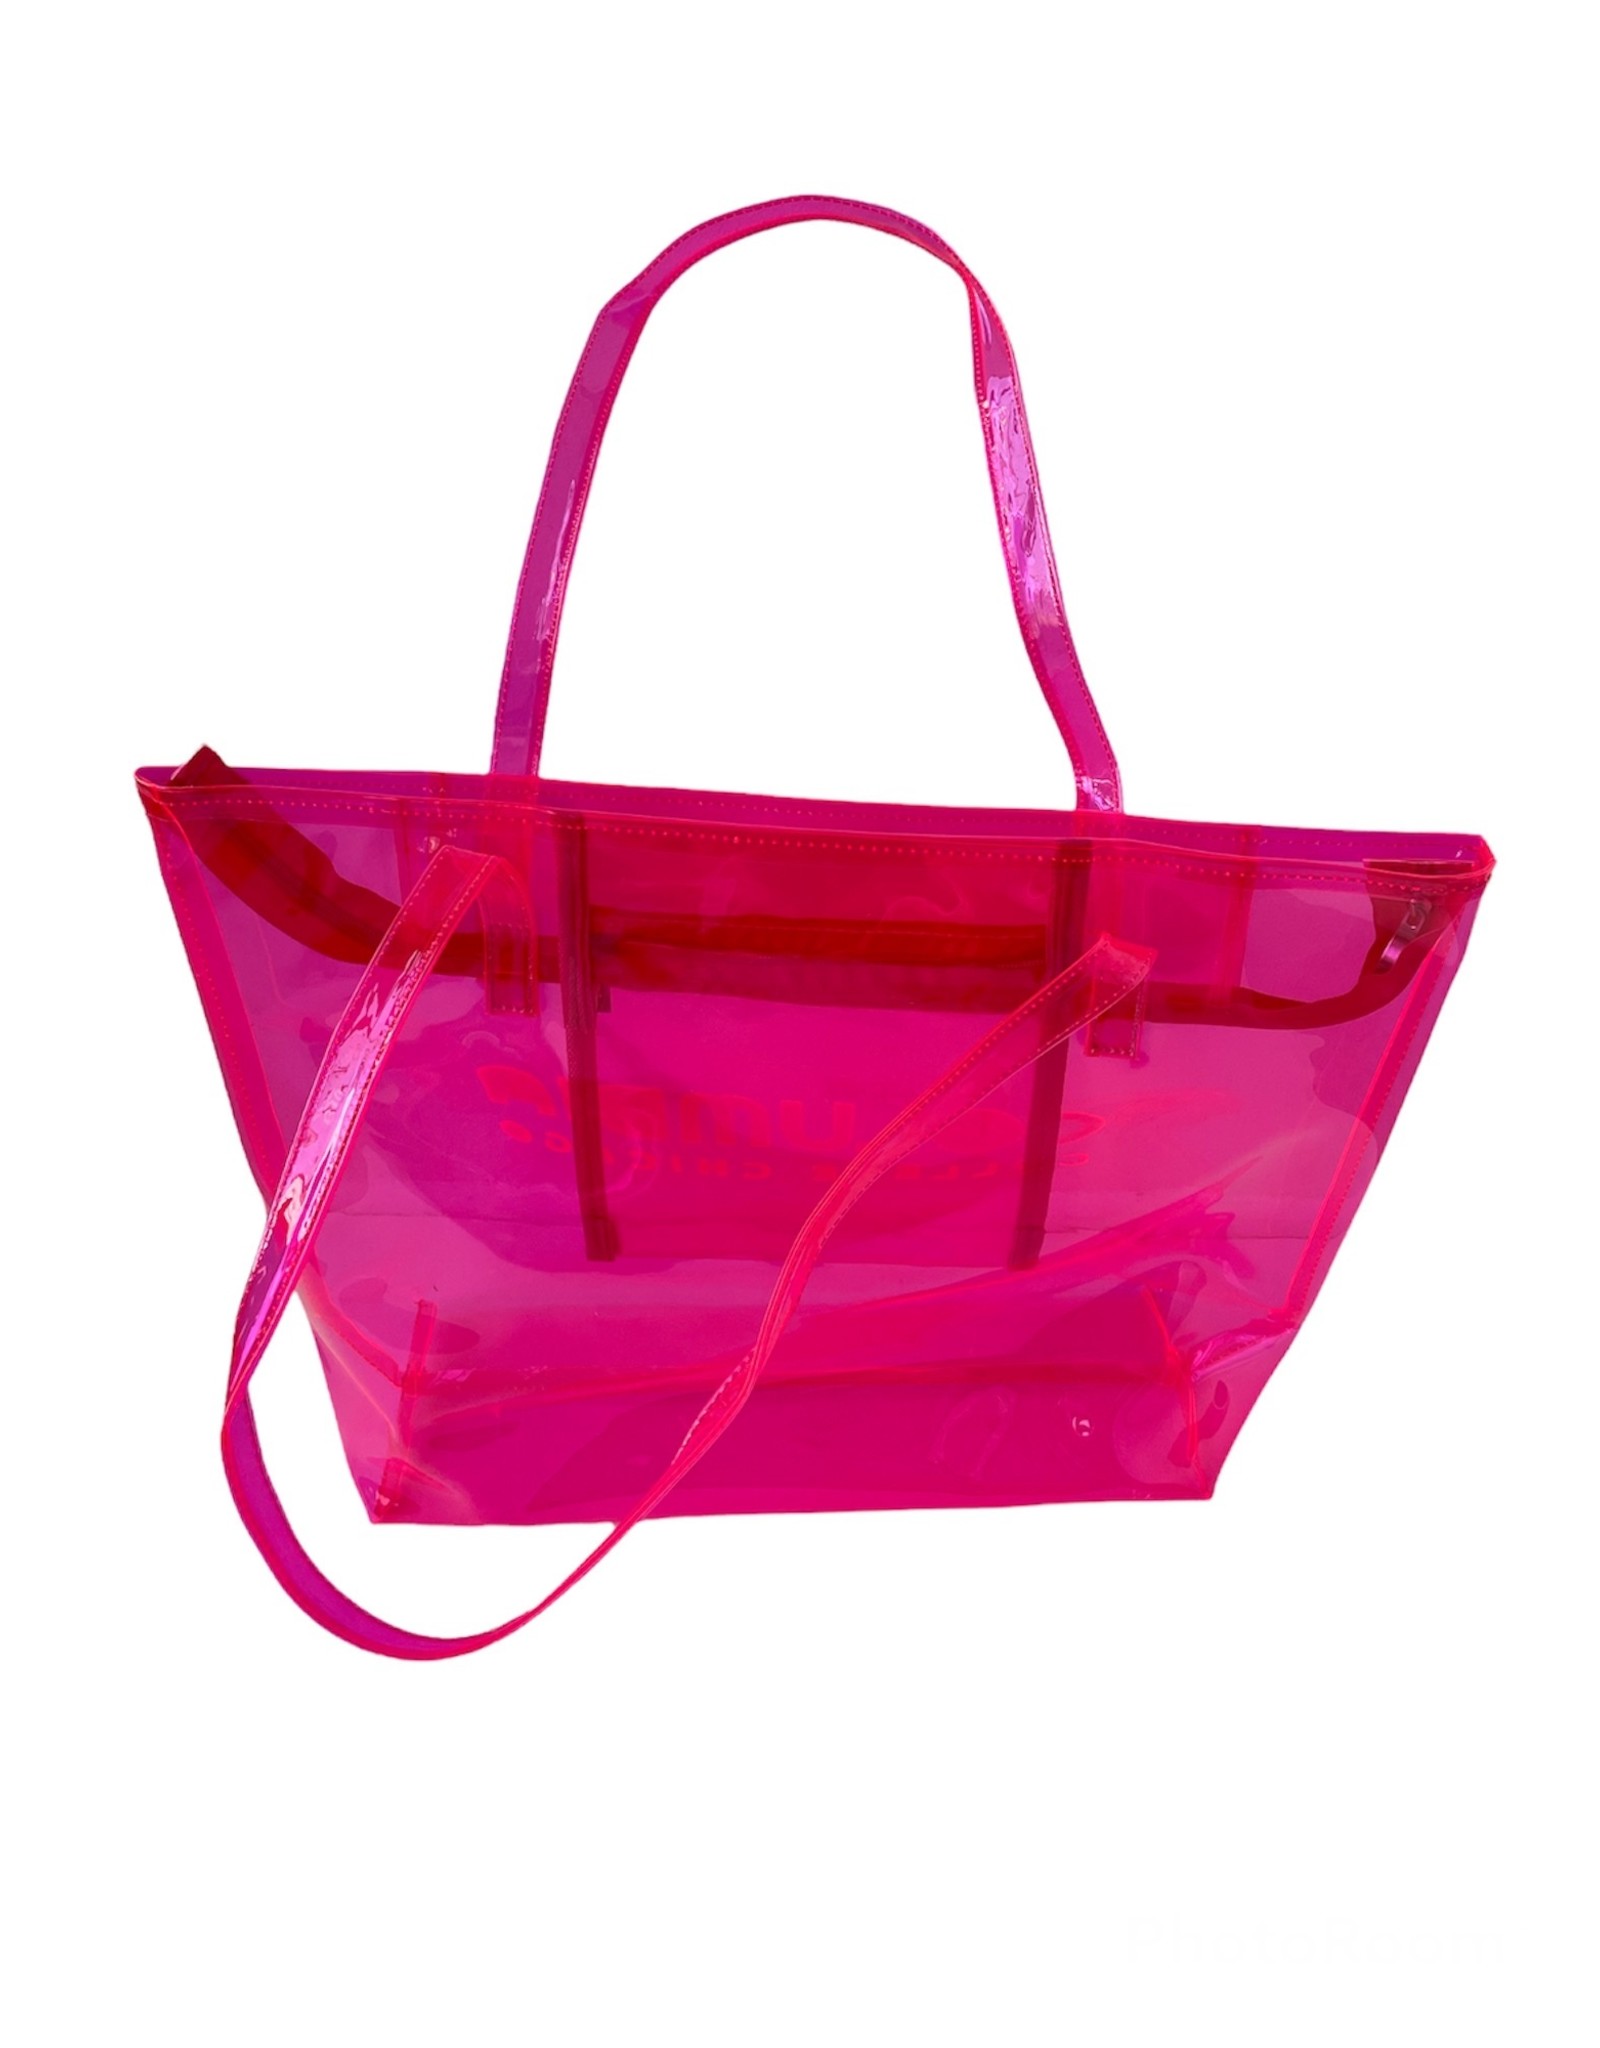 Buy Columbia, By Columbia NEW: Columbia College Chicago Neon Pink Jelly Tote